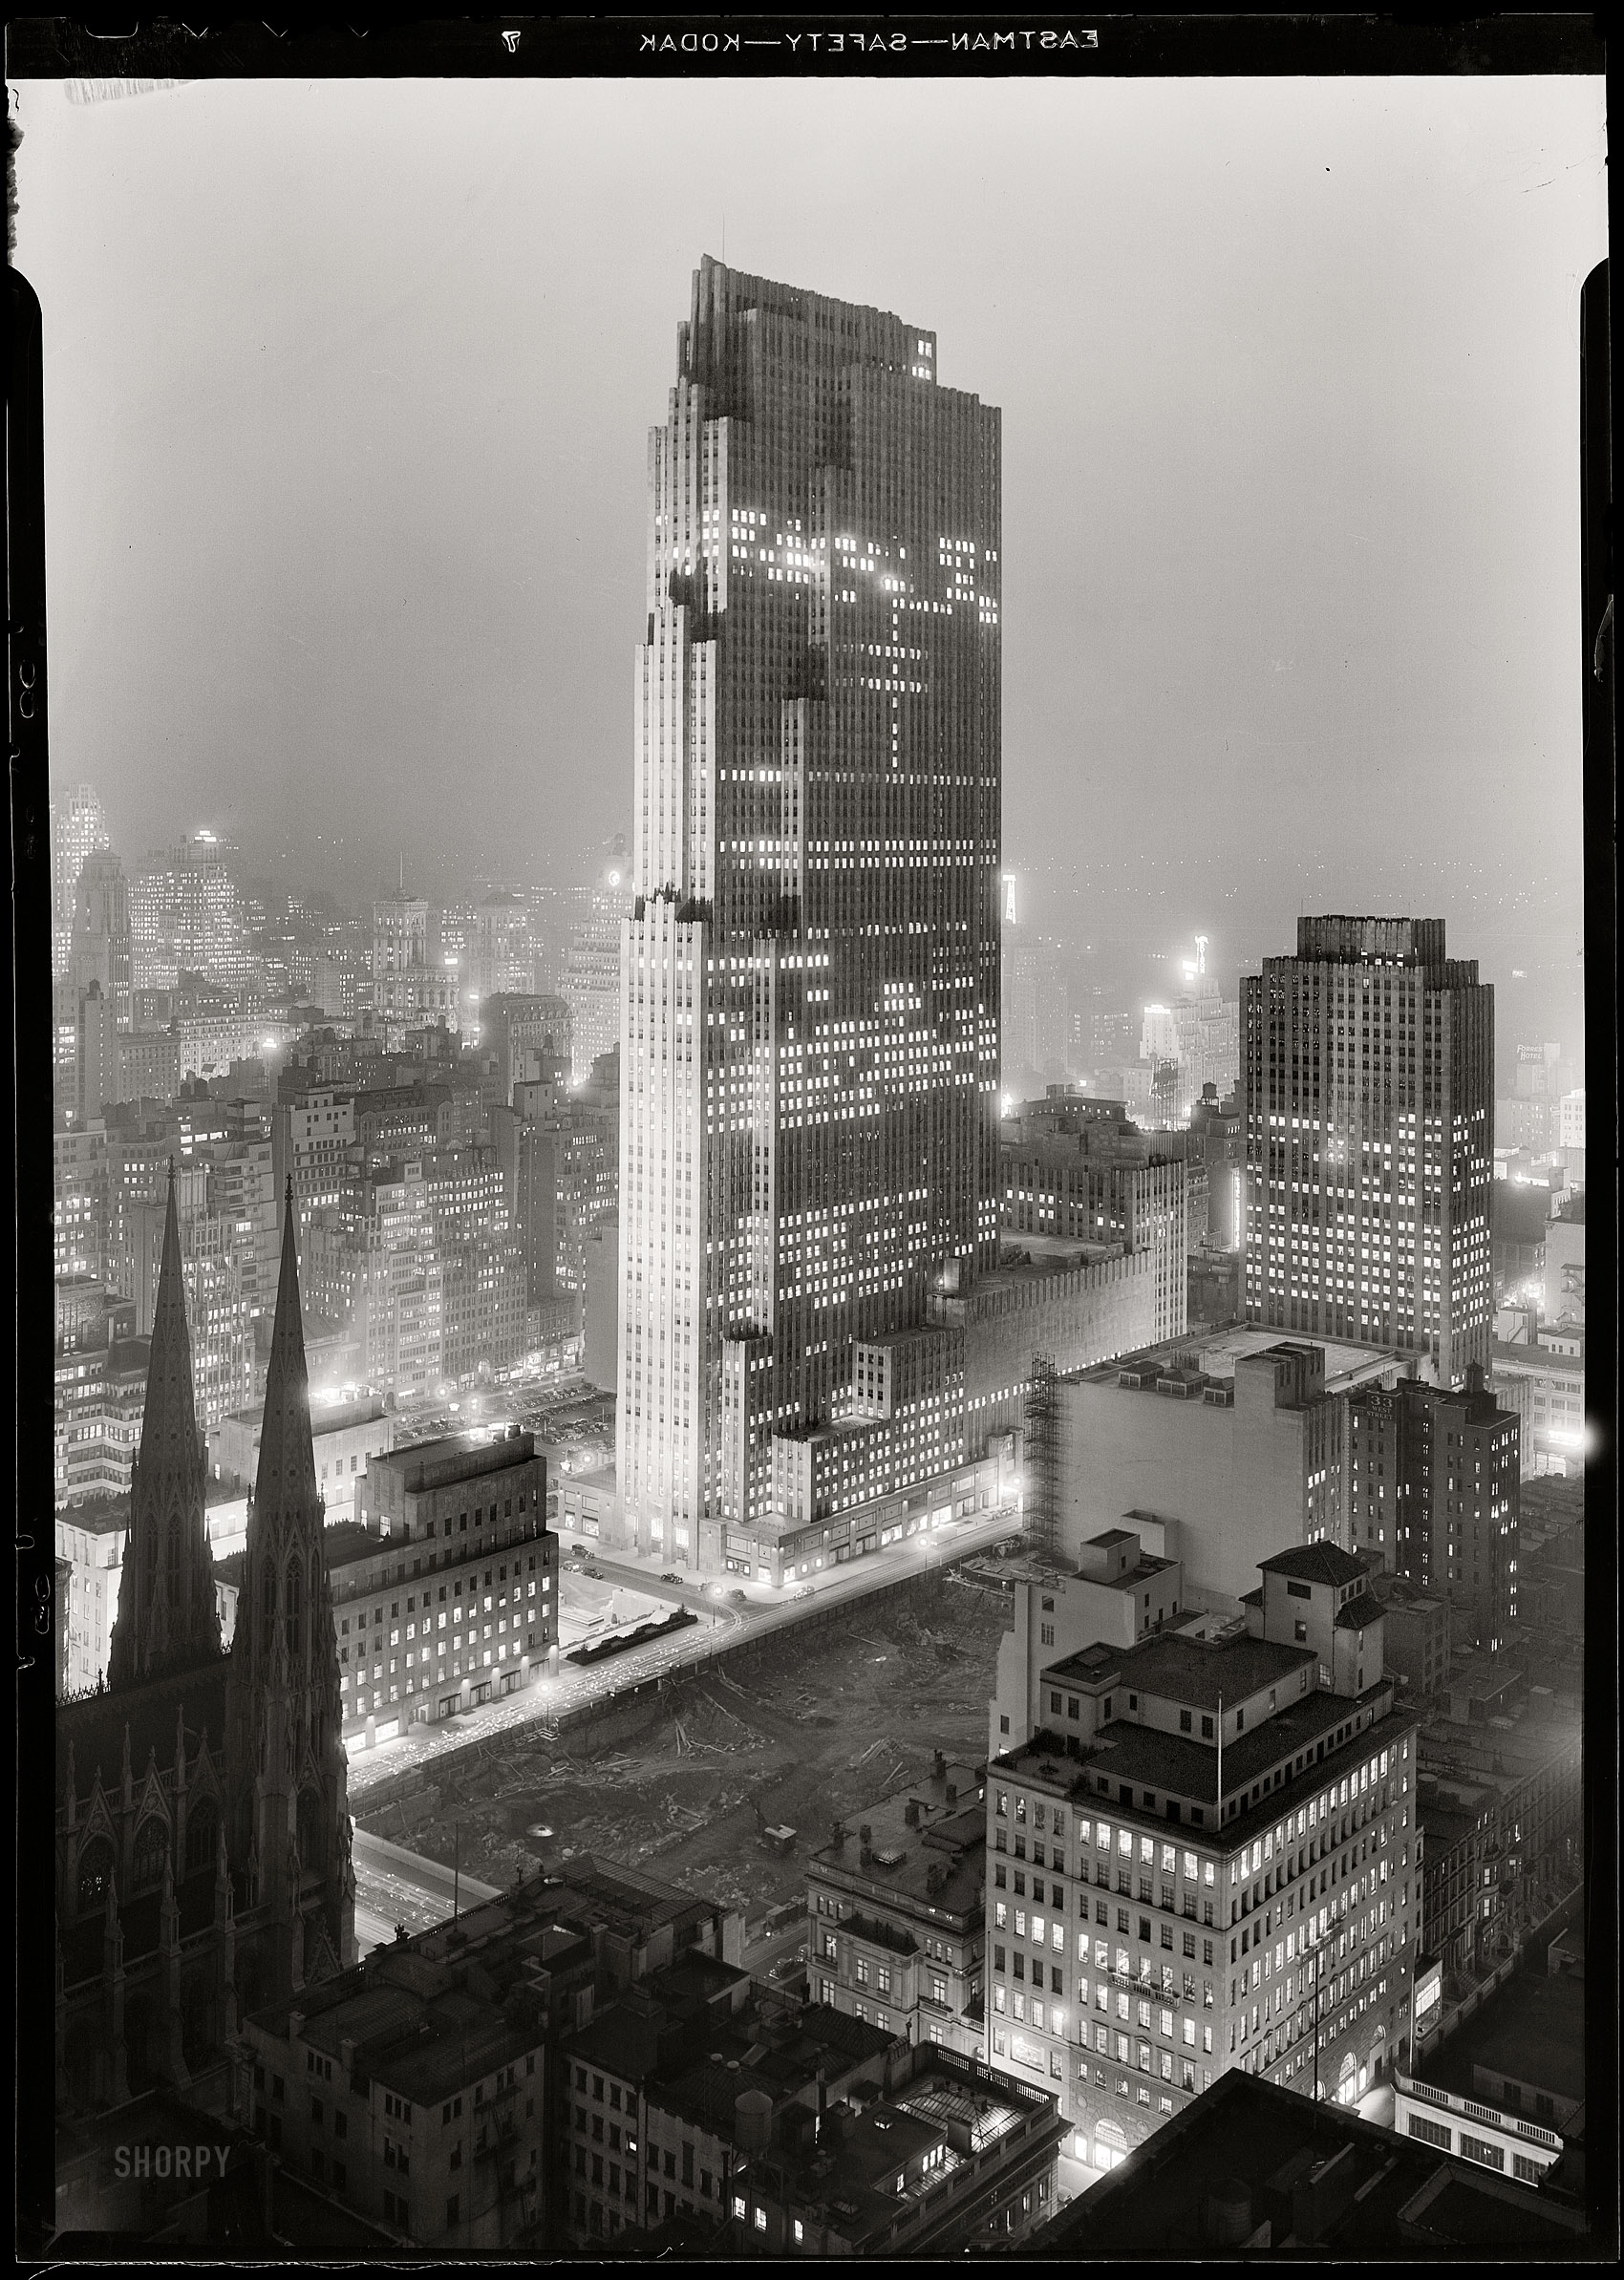 New York. December 5, 1933. "Rockefeller Center and RCA Building from 515 Madison Avenue." Digital image recovered from released emulsion layer of the original 5x7 acetate negative. Gottscho-Schleisner photo. View full size.